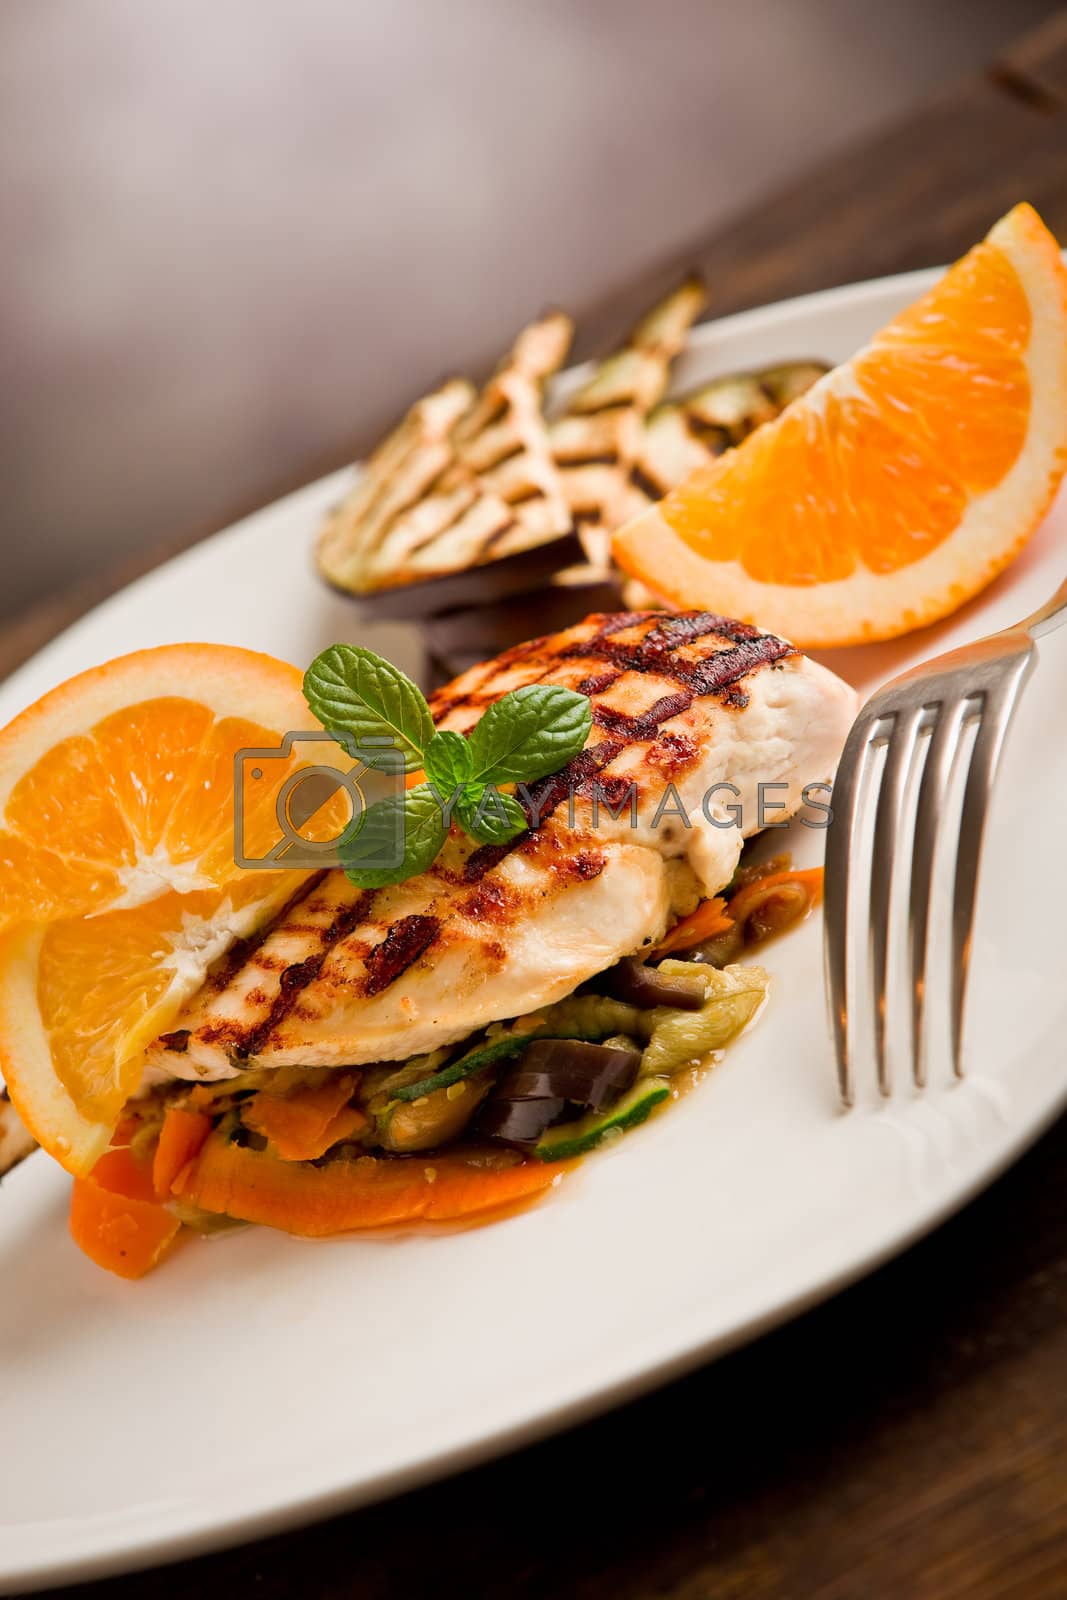 Royalty free image of Grilled chicken breast on ratatouille bed by genious2000de